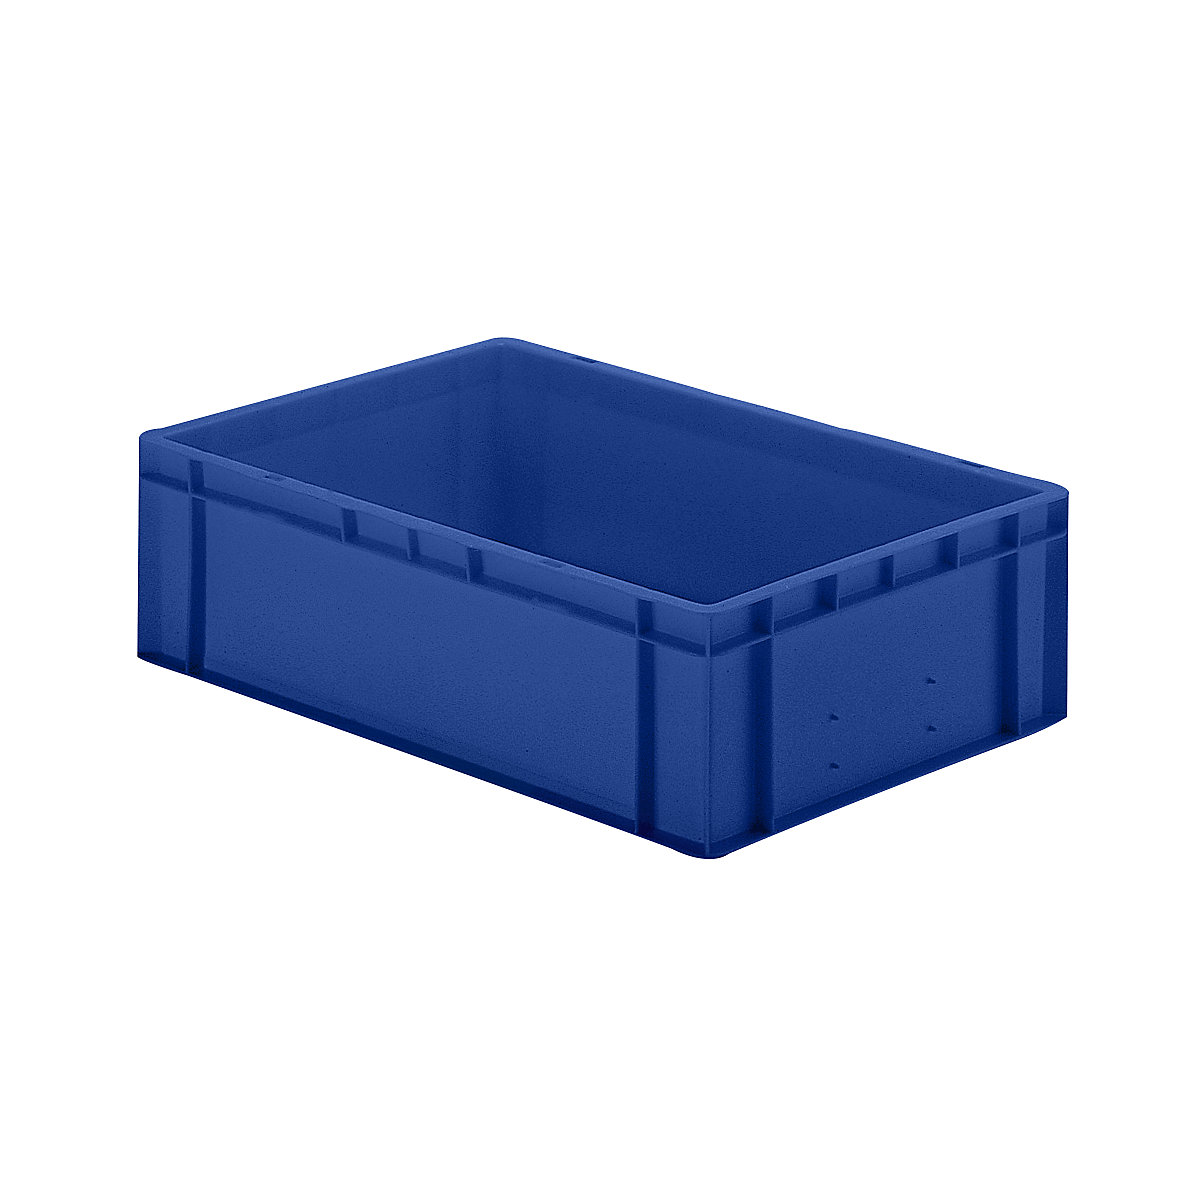 Euro stacking container, closed walls and base, LxWxH 600 x 400 x 175 mm, blue, pack of 5